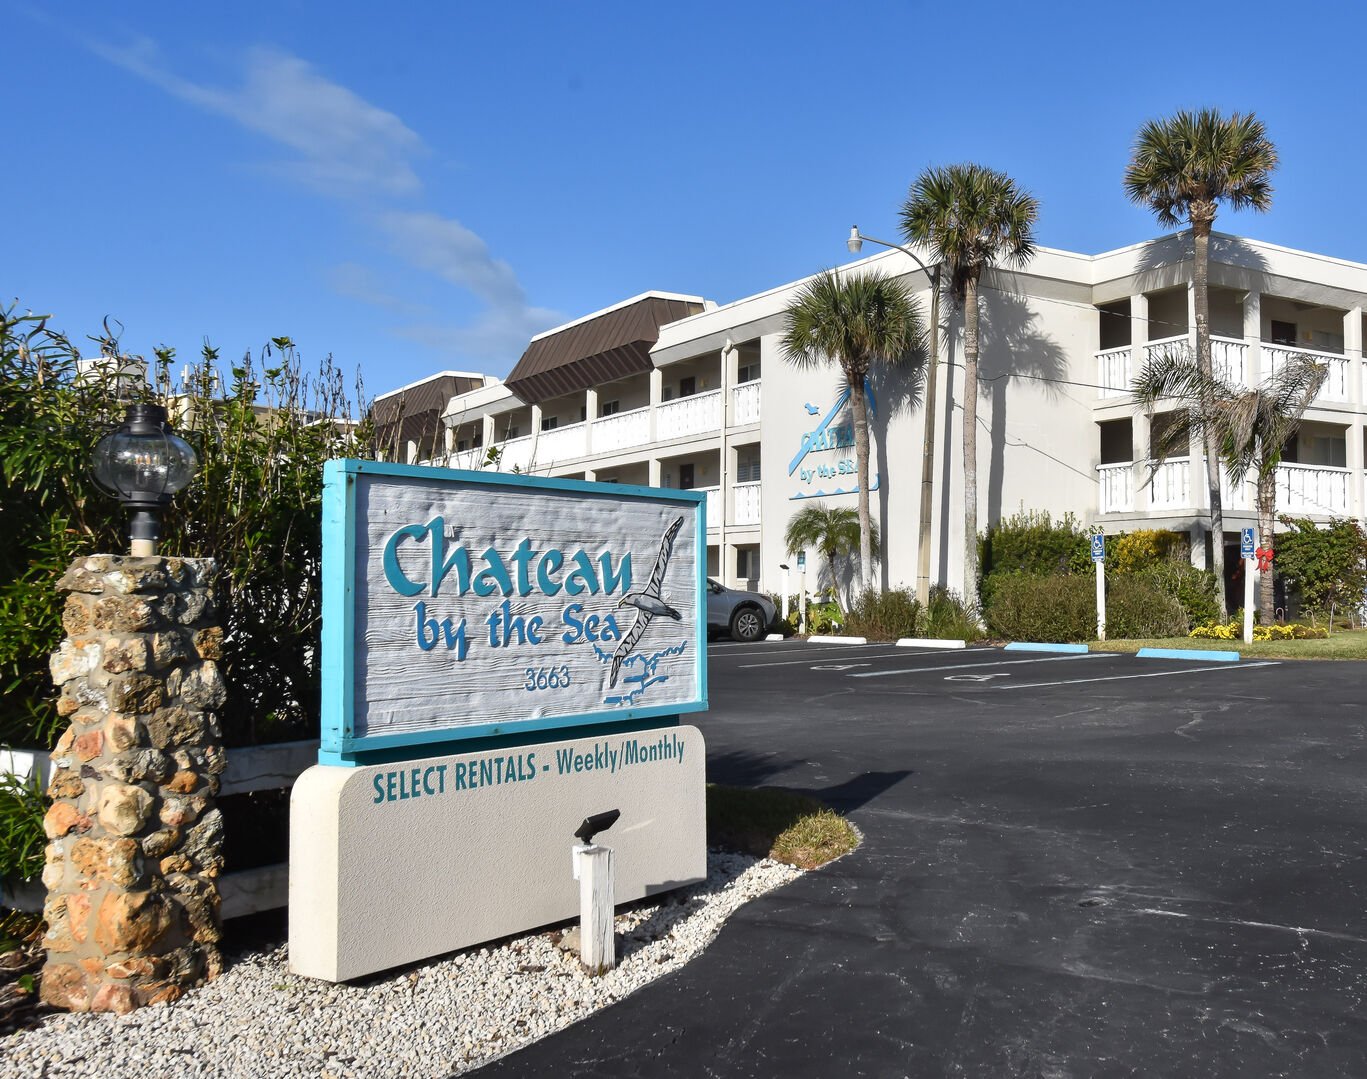 Chateau by the Sea sign and the building